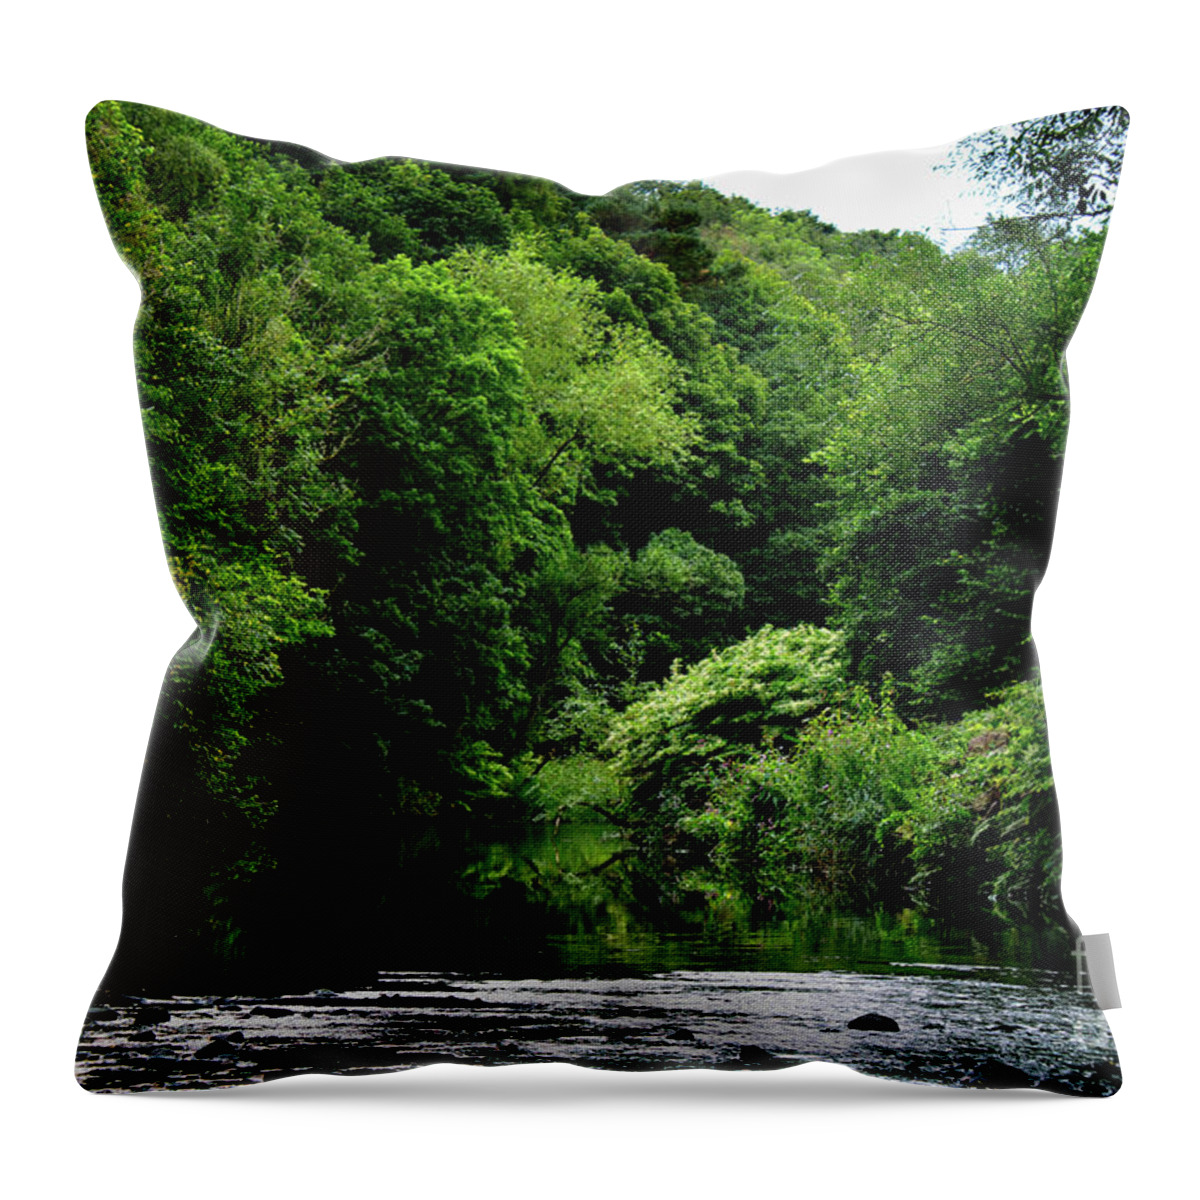 Featured Throw Pillow featuring the photograph Riparian Forest - Study II by Doc Braham